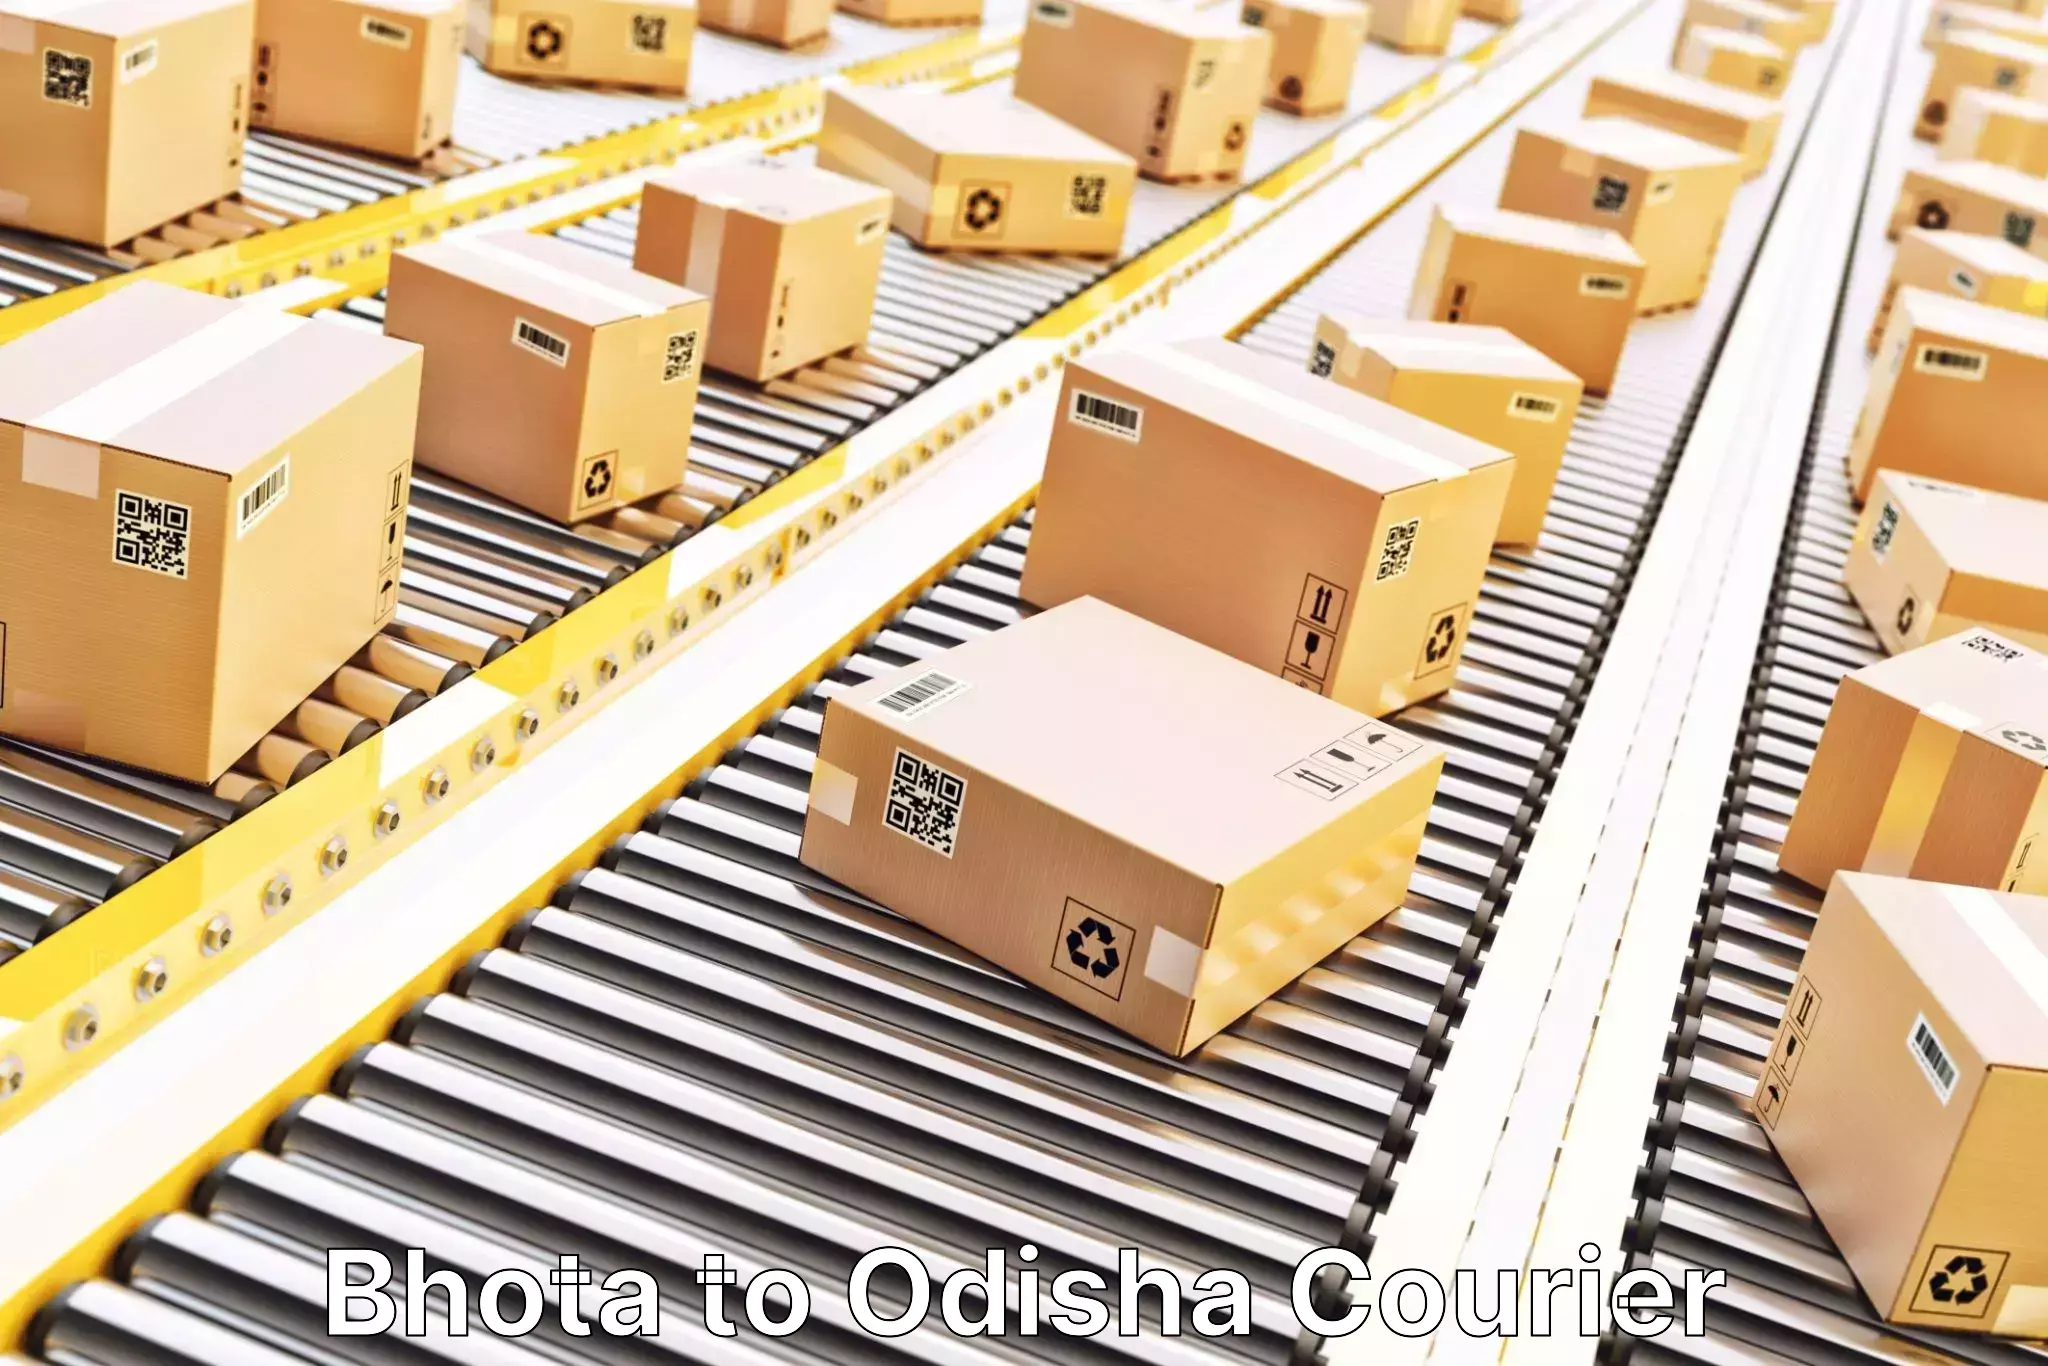 Cost-effective shipping solutions Bhota to Bhubaneswar